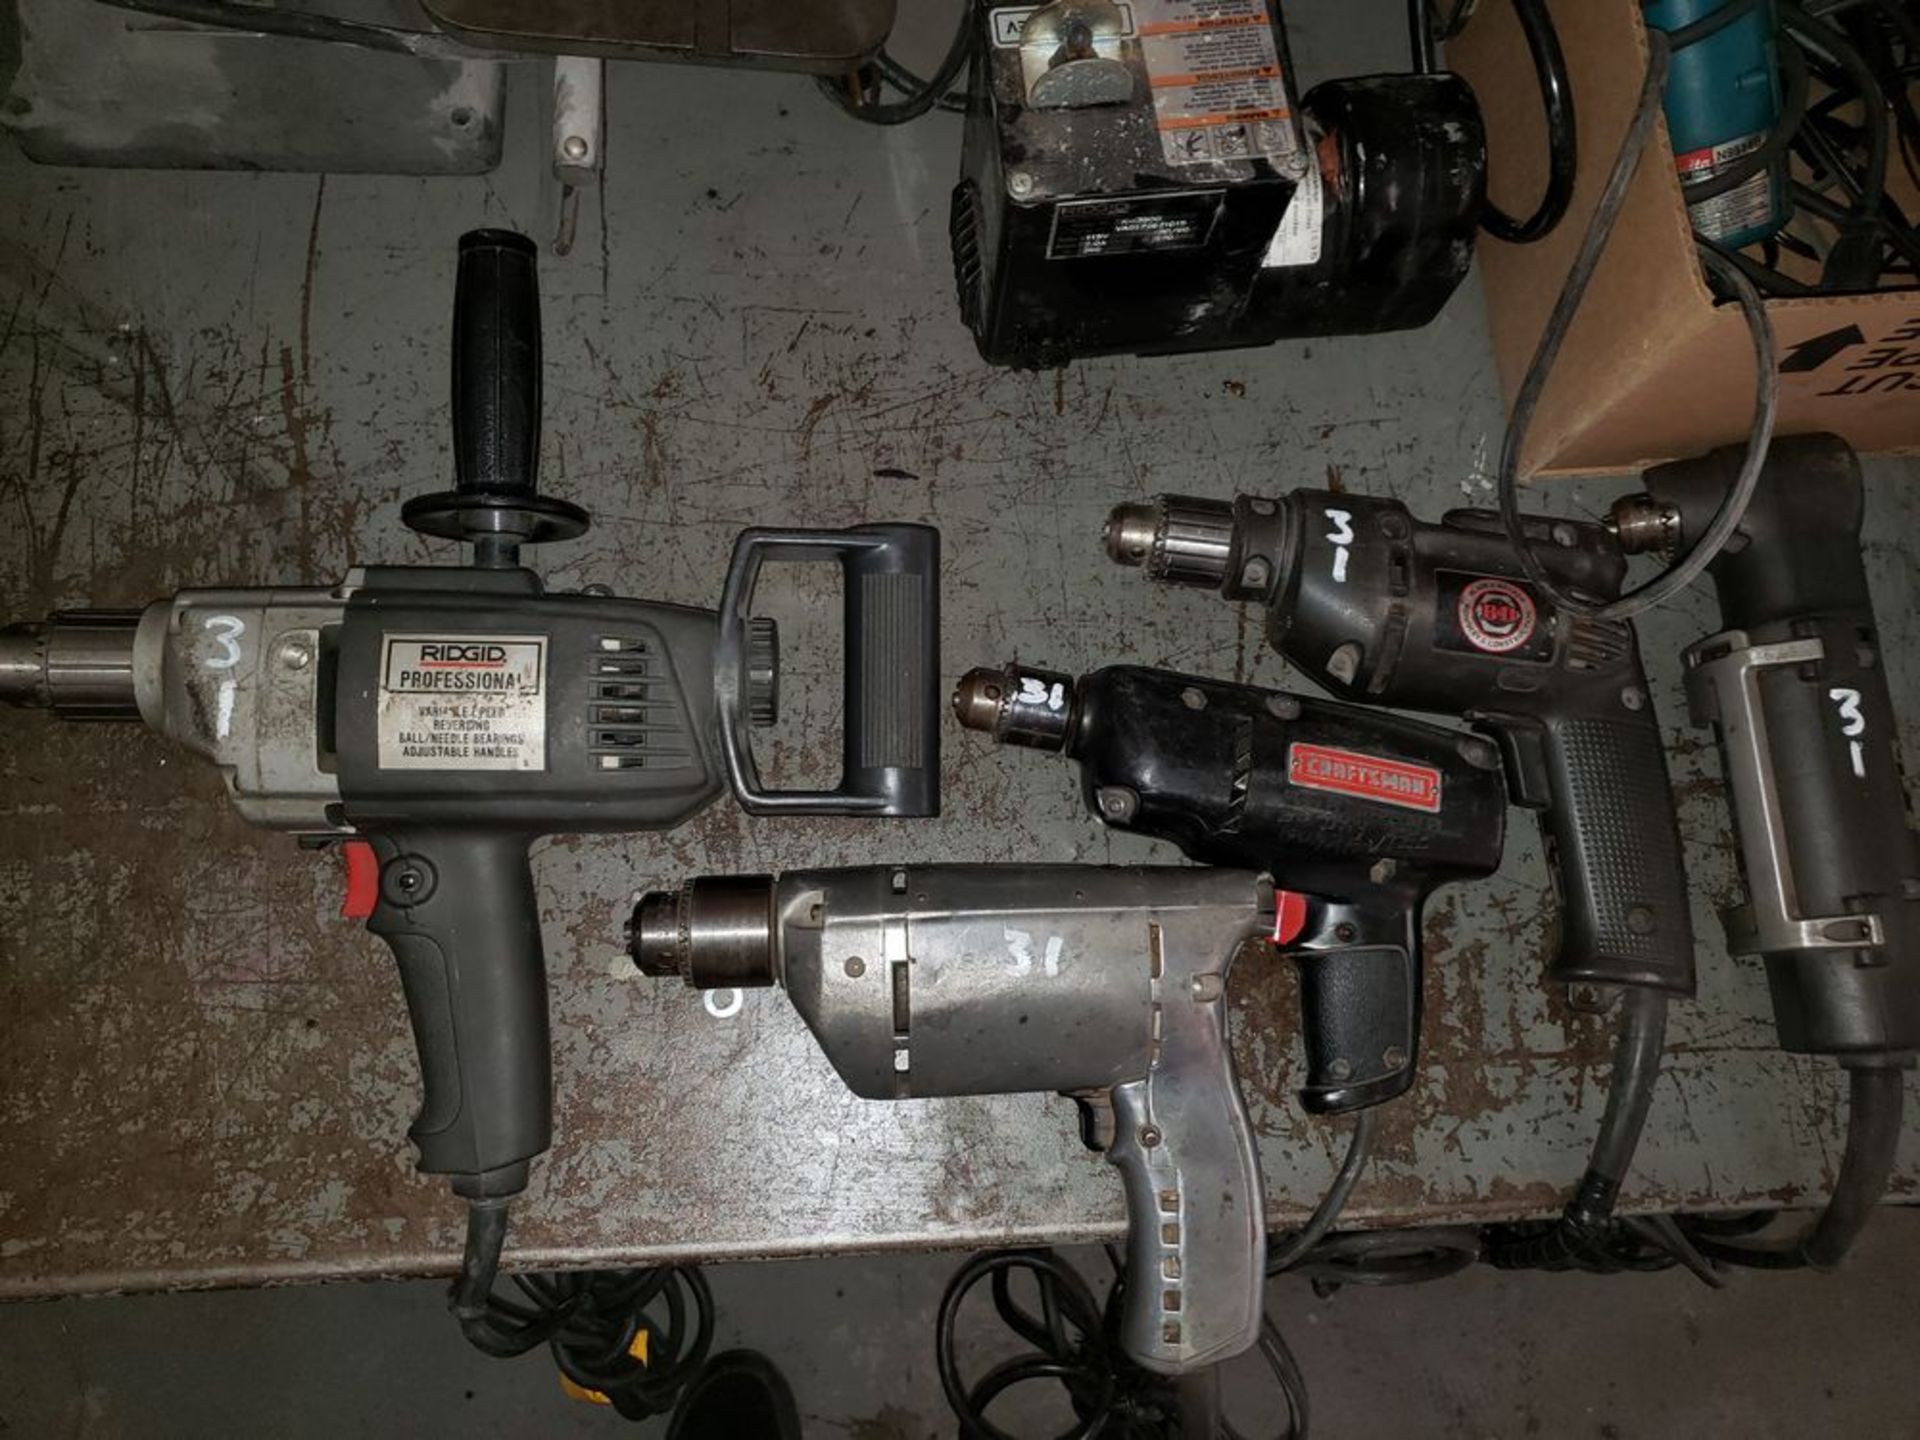 Power Tool Group: Makita 4" Disc Grinder, Die Hard Cordless Drill and More Extra Details: Makita - Image 2 of 2